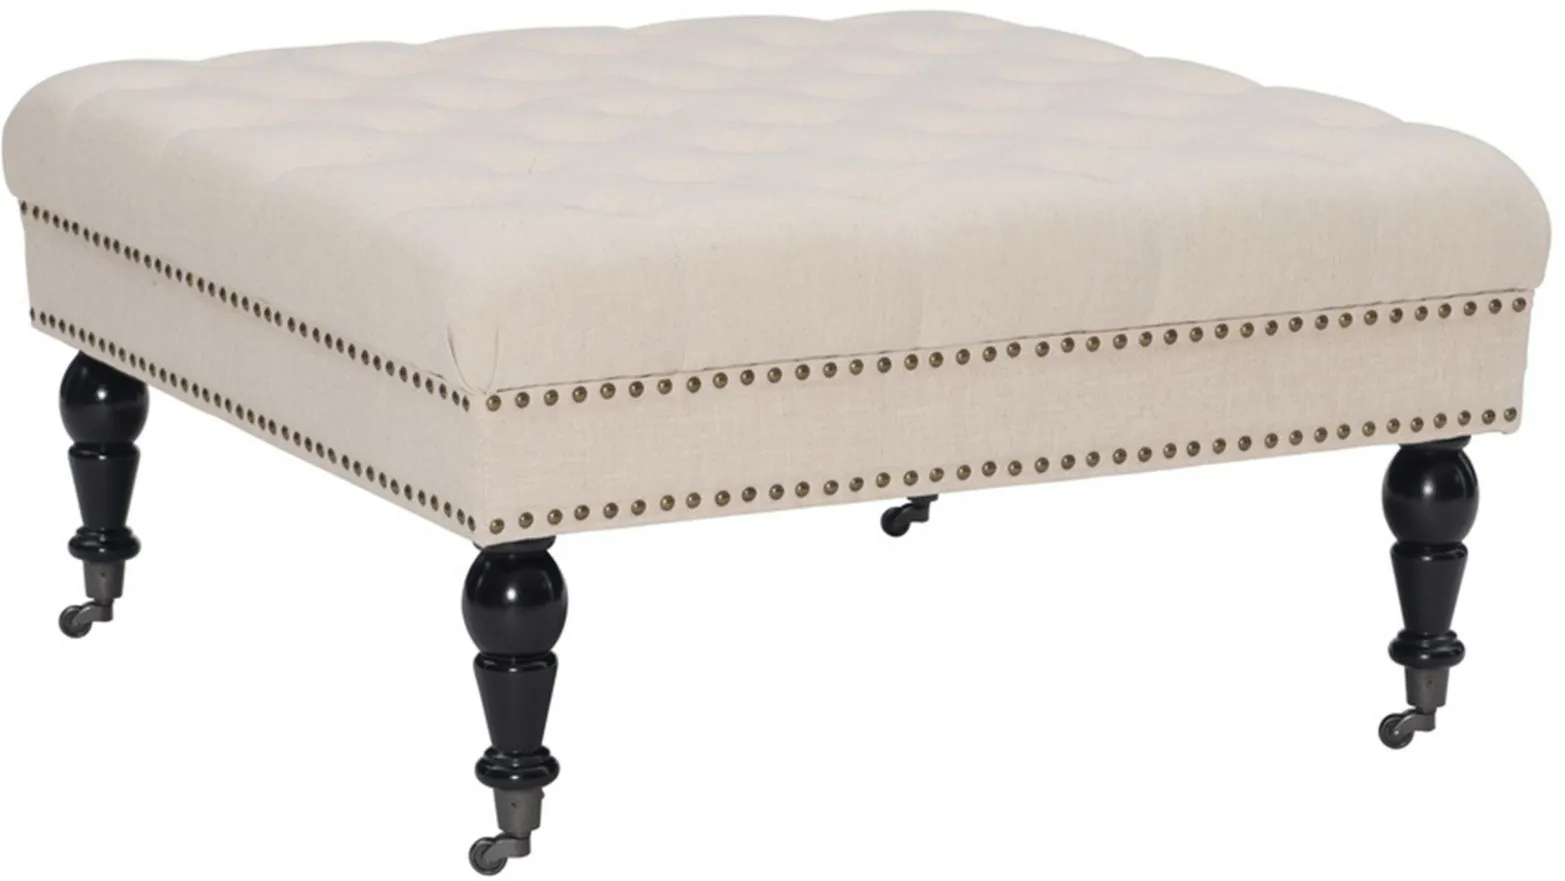 Isabelle Ottoman in Beige by Linon Home Decor